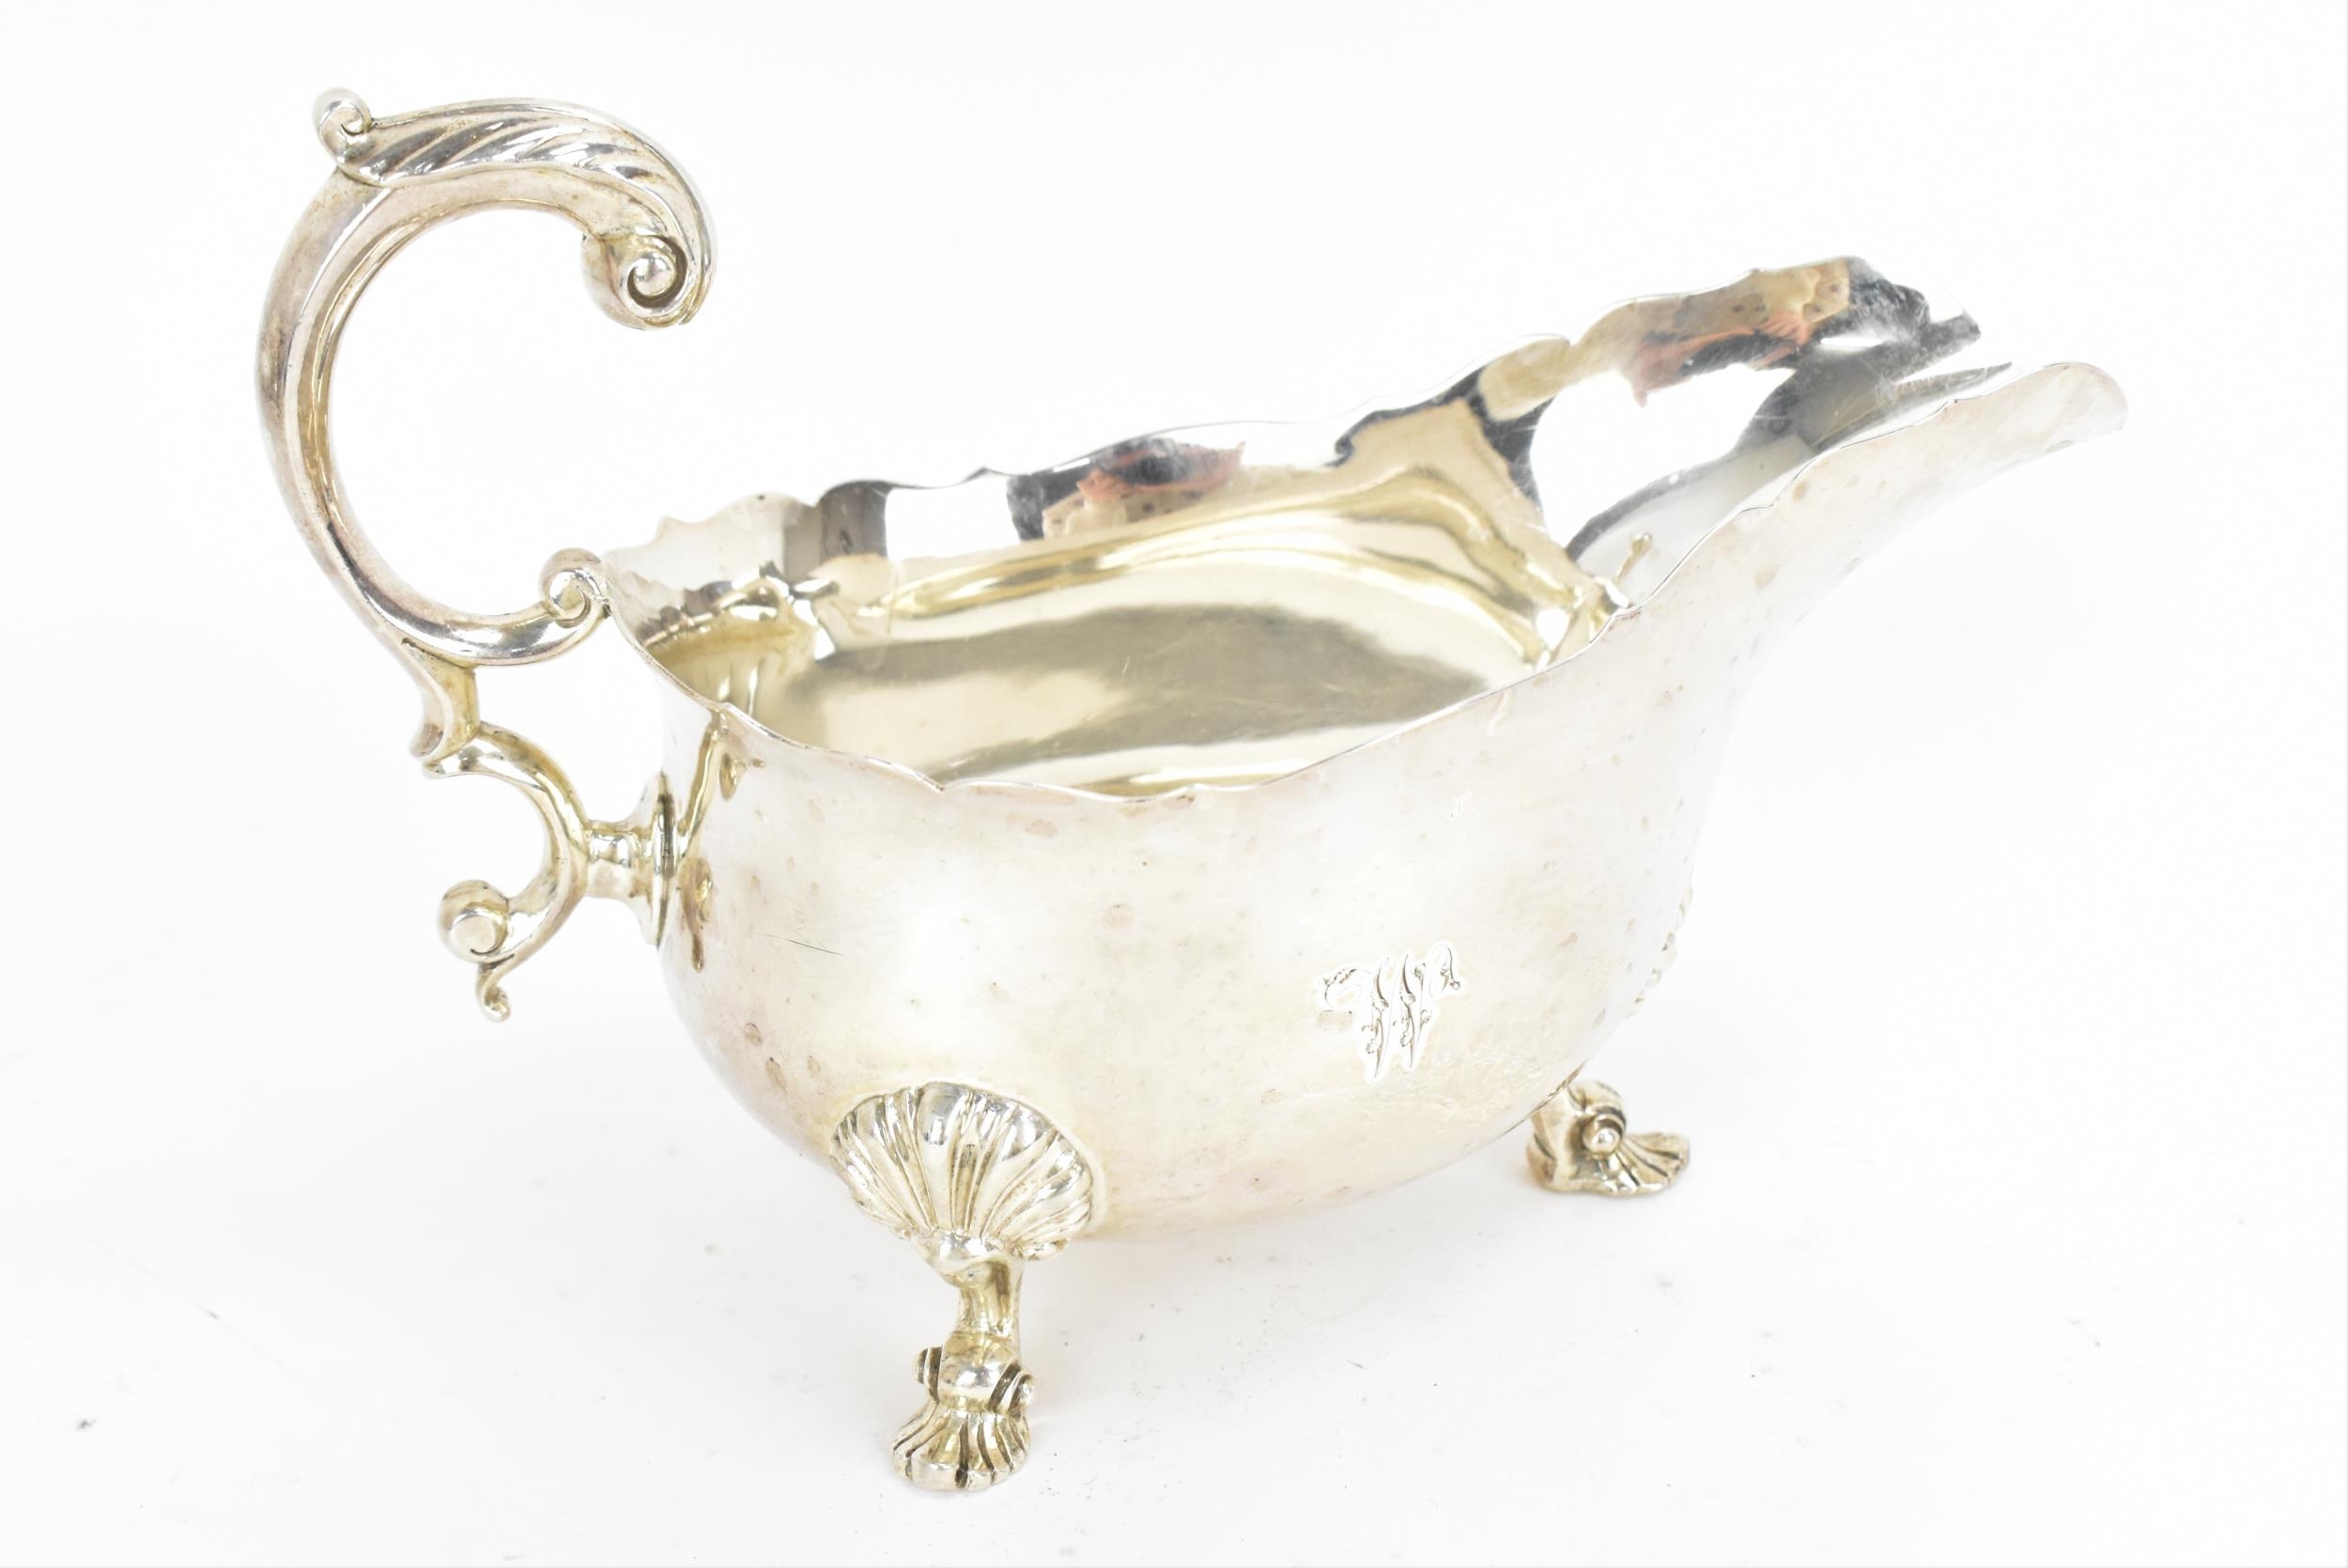 A large George III silver sauce boat by Robert Garrard II, London 1825, with pinched rim and c-